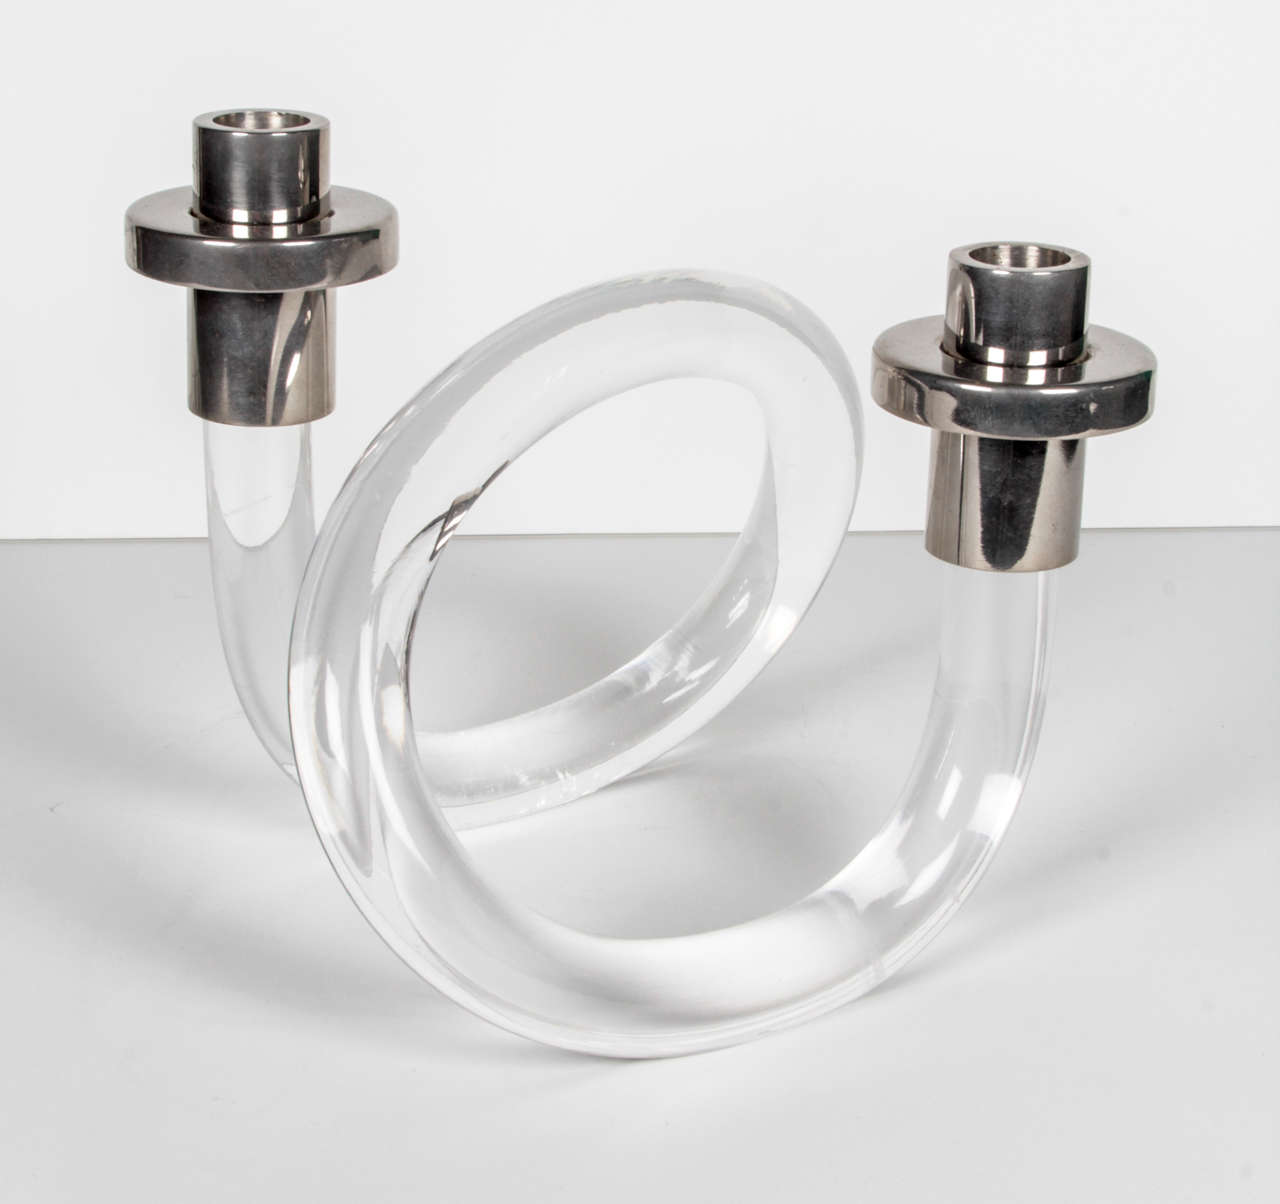 A Dorothy Thorpe 2-arm lucite candle holder with silver-plated fittings.